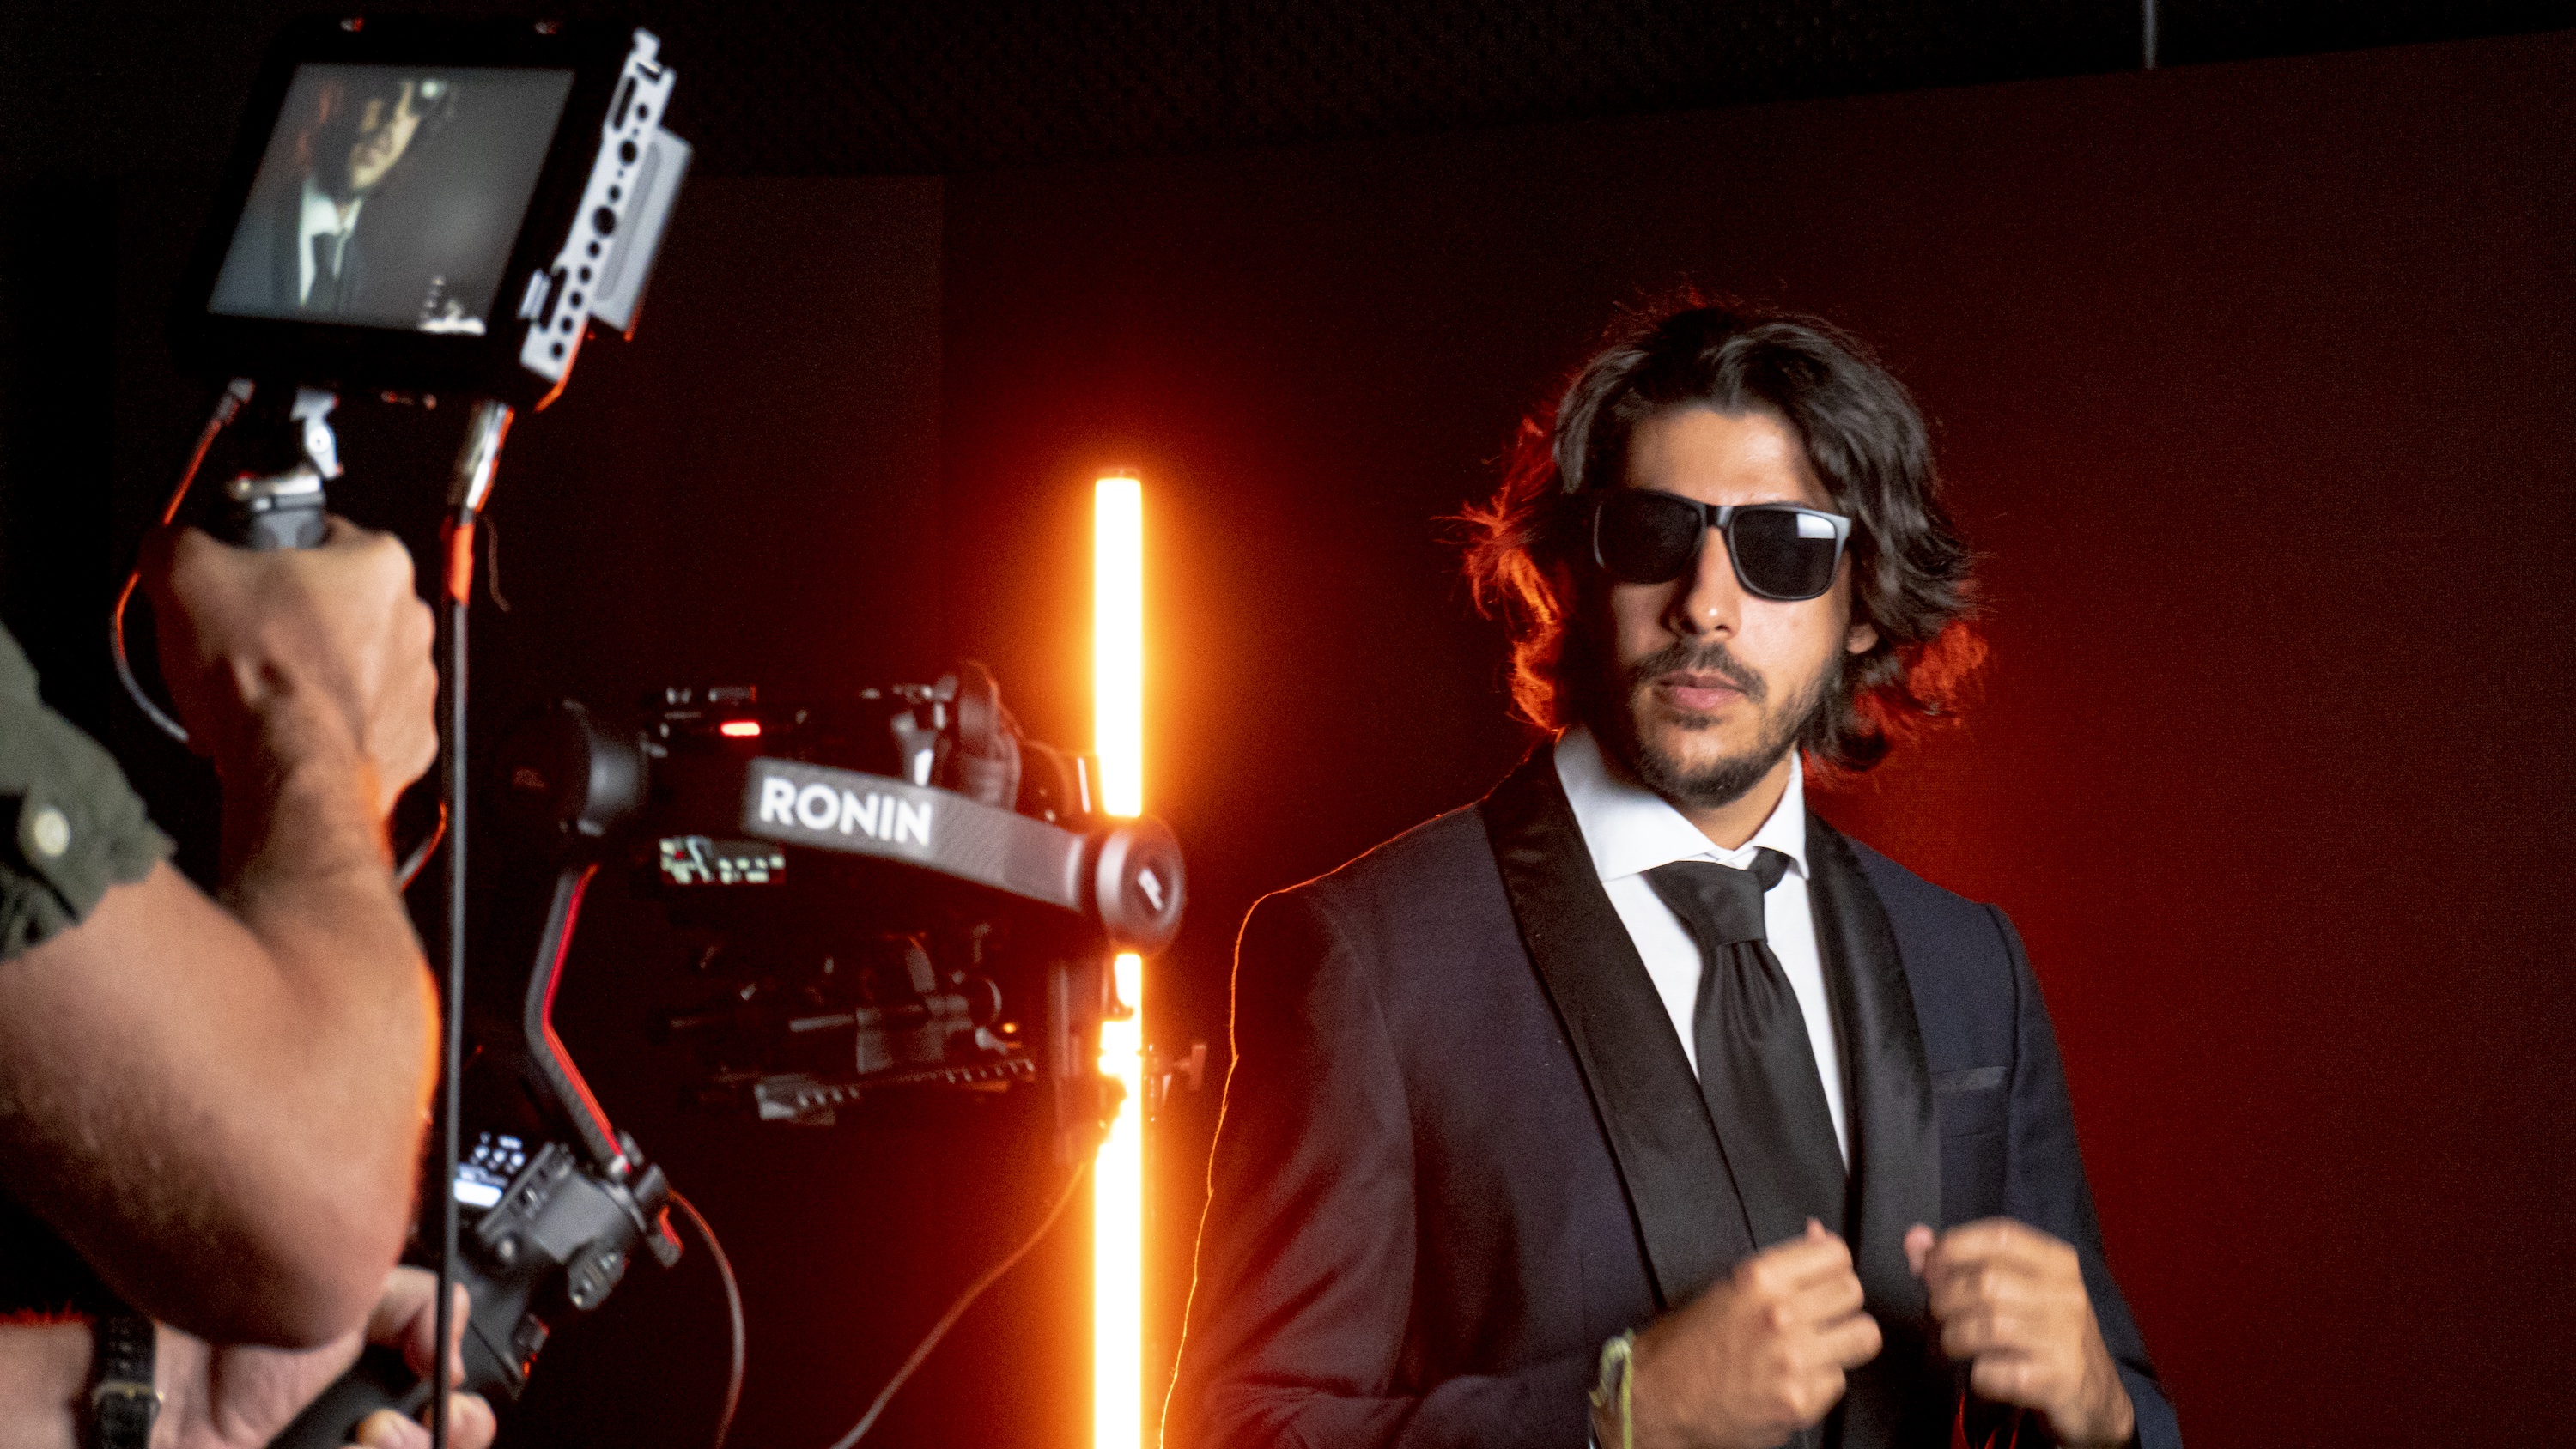 Baiano poses for a video camera while wearing a black suit and black sunglasses